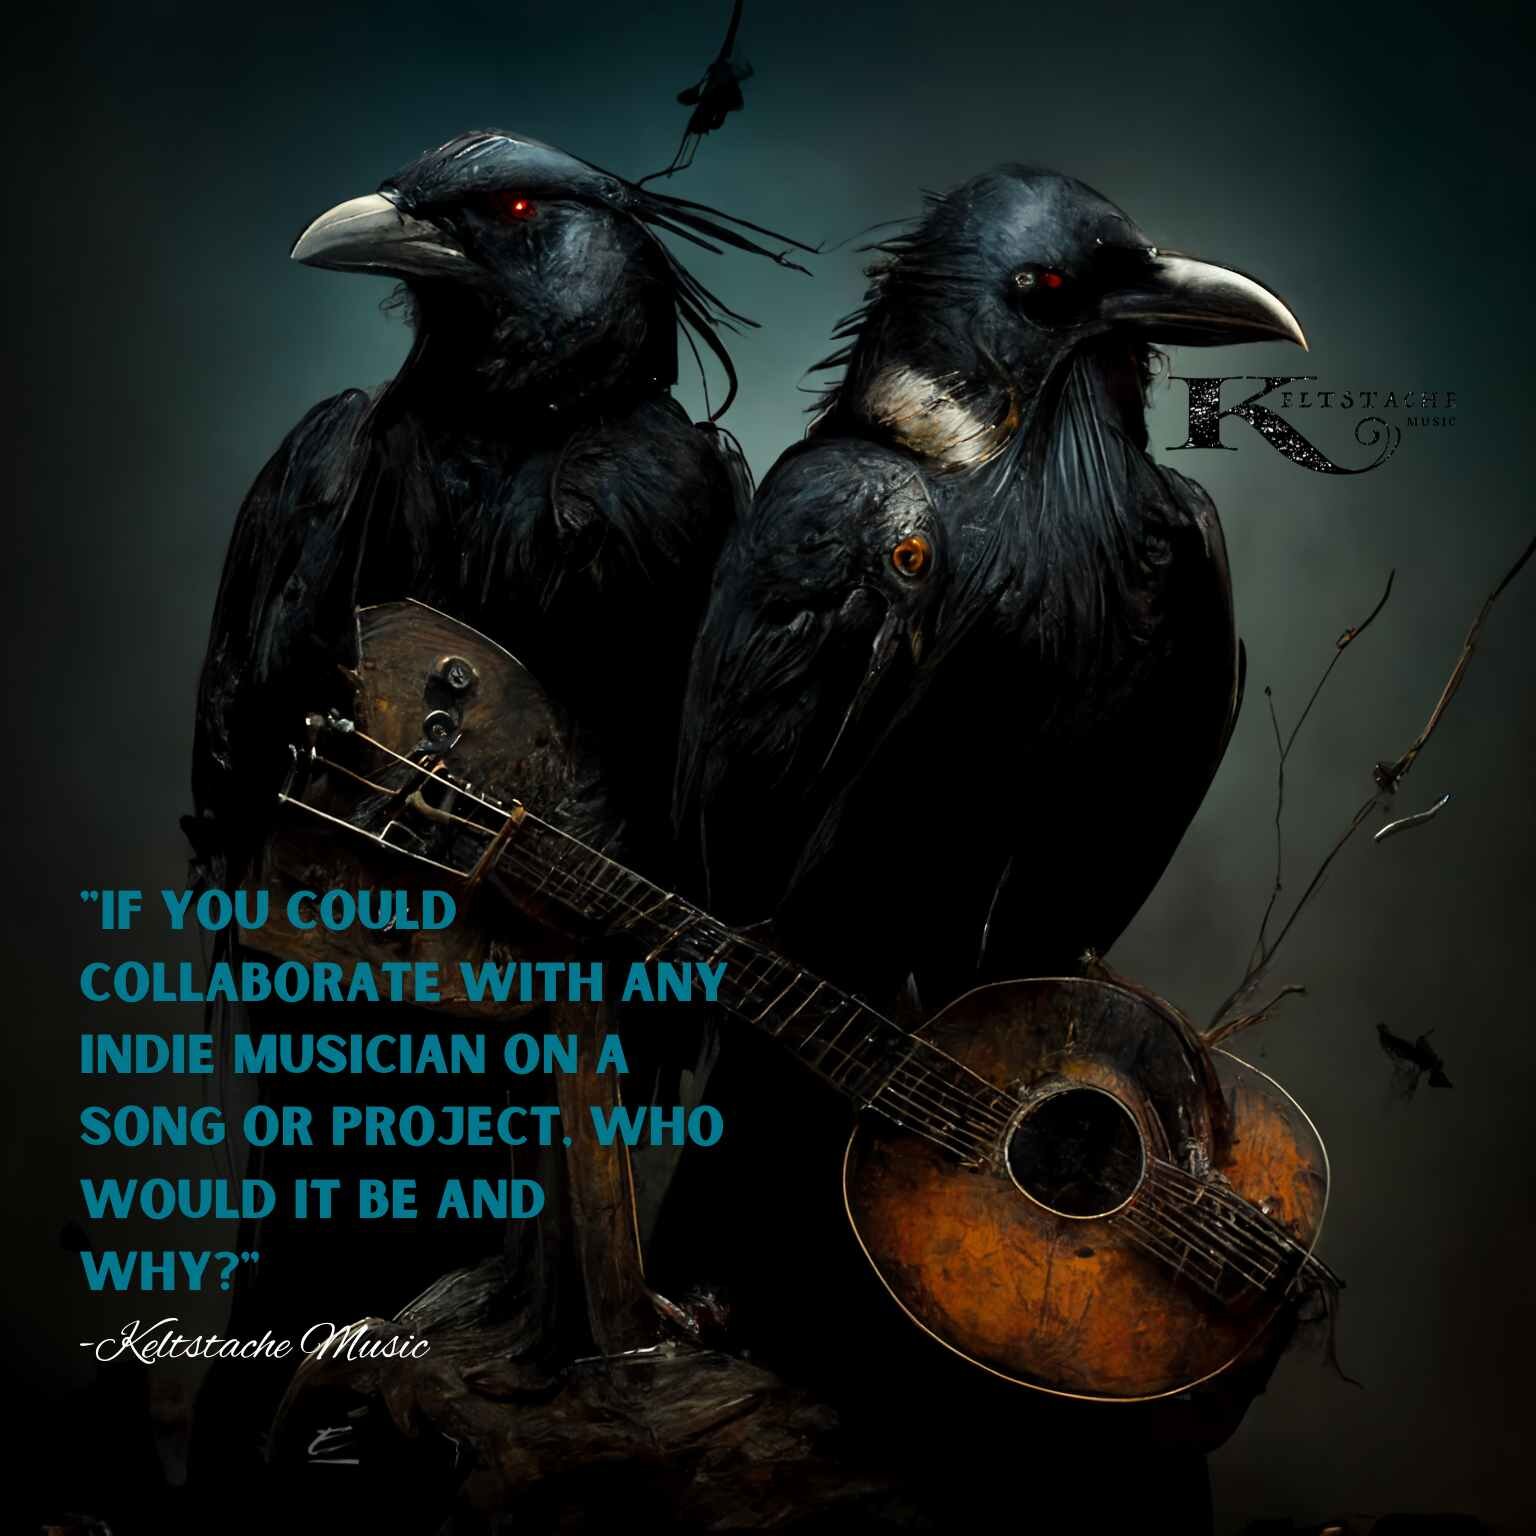 &quot;IF YOU COULD COLLABORATE WITH ANY
INDIE MUSICIAN ON A SONG OR PROJECT, WHO WOULD IT BE AND WHY?&quot; ~KSM #IndieIsGood #indiemusic